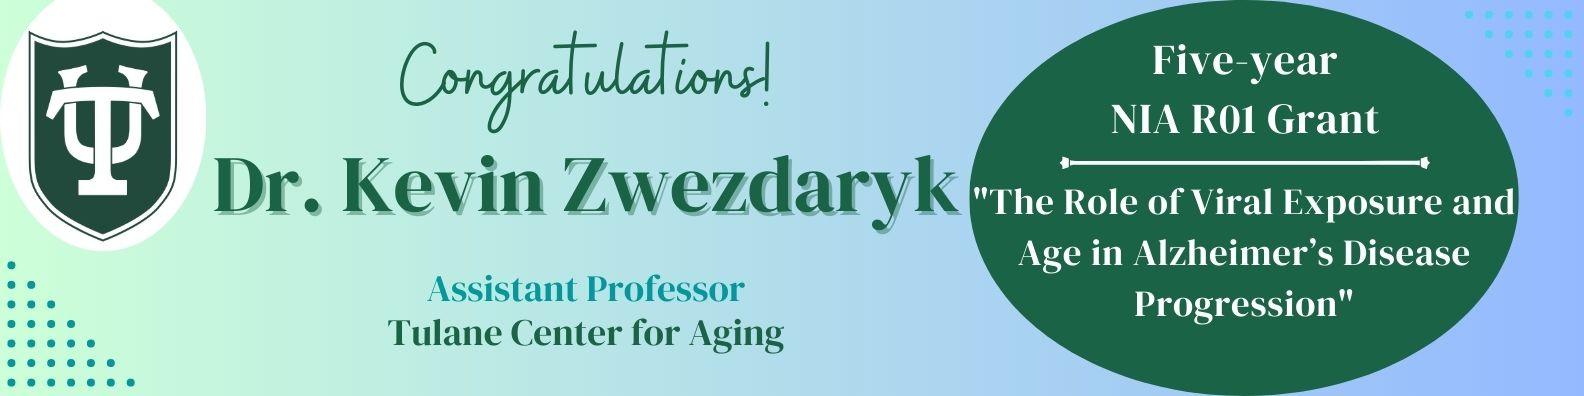 Congratulations to Dr.Zwezdaryk